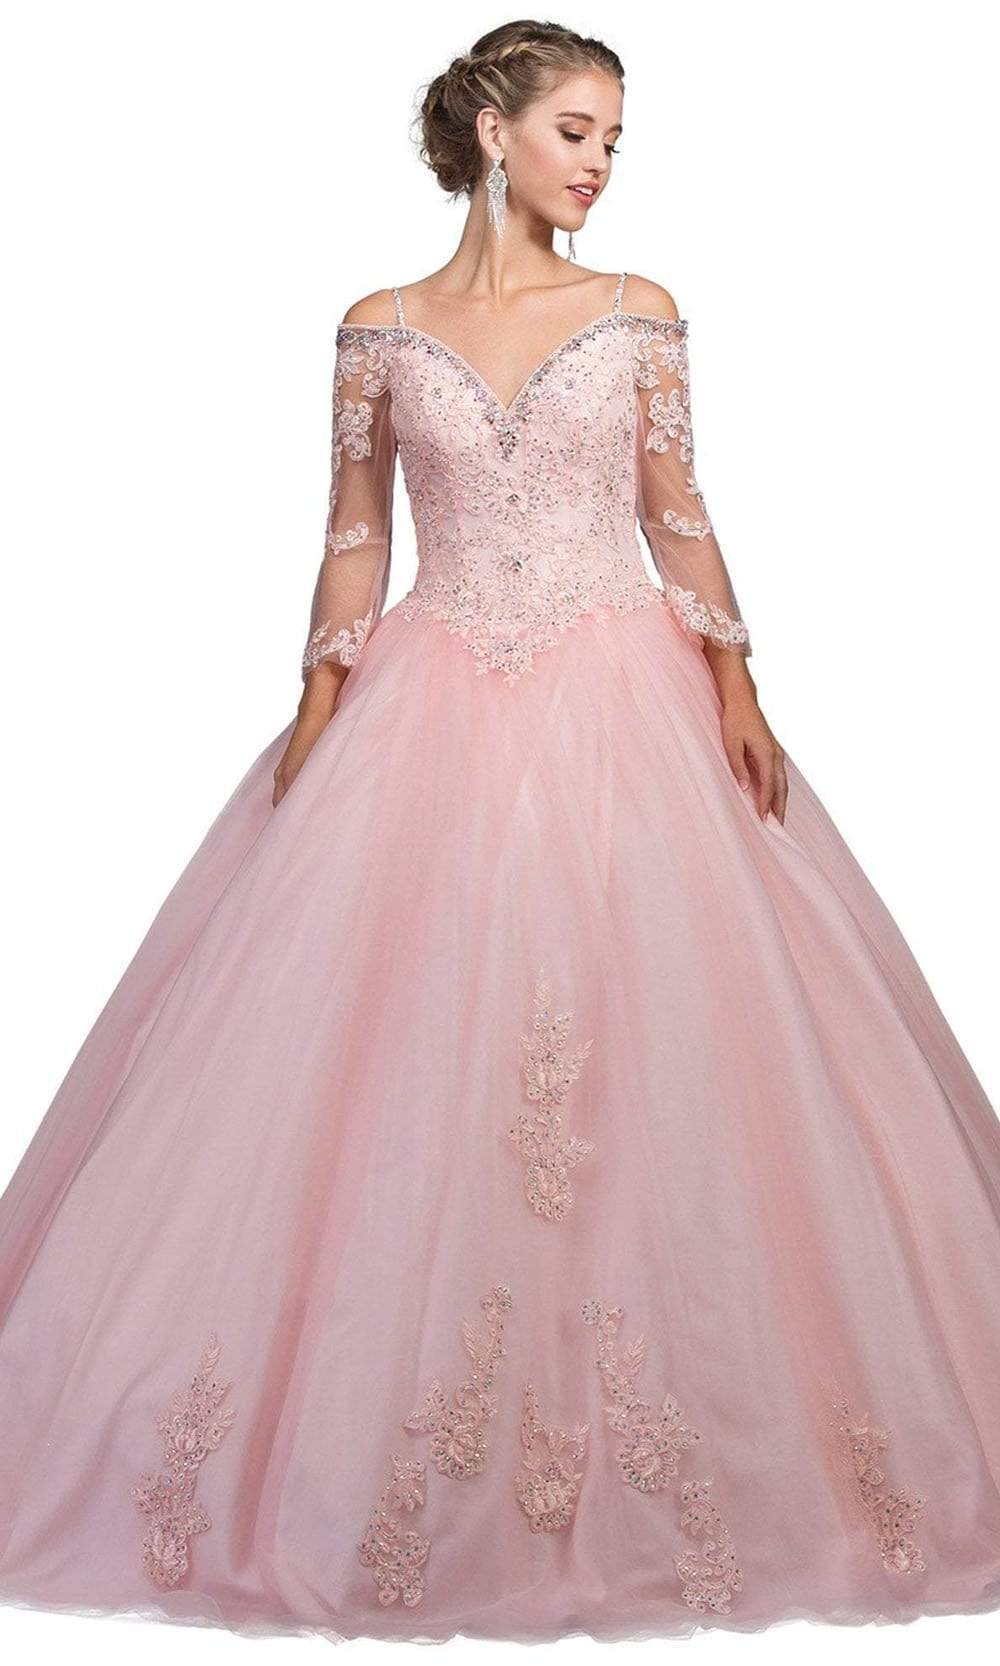 Image of Dancing Queen - 1266 Embellished Lace Fantasy Ballgown